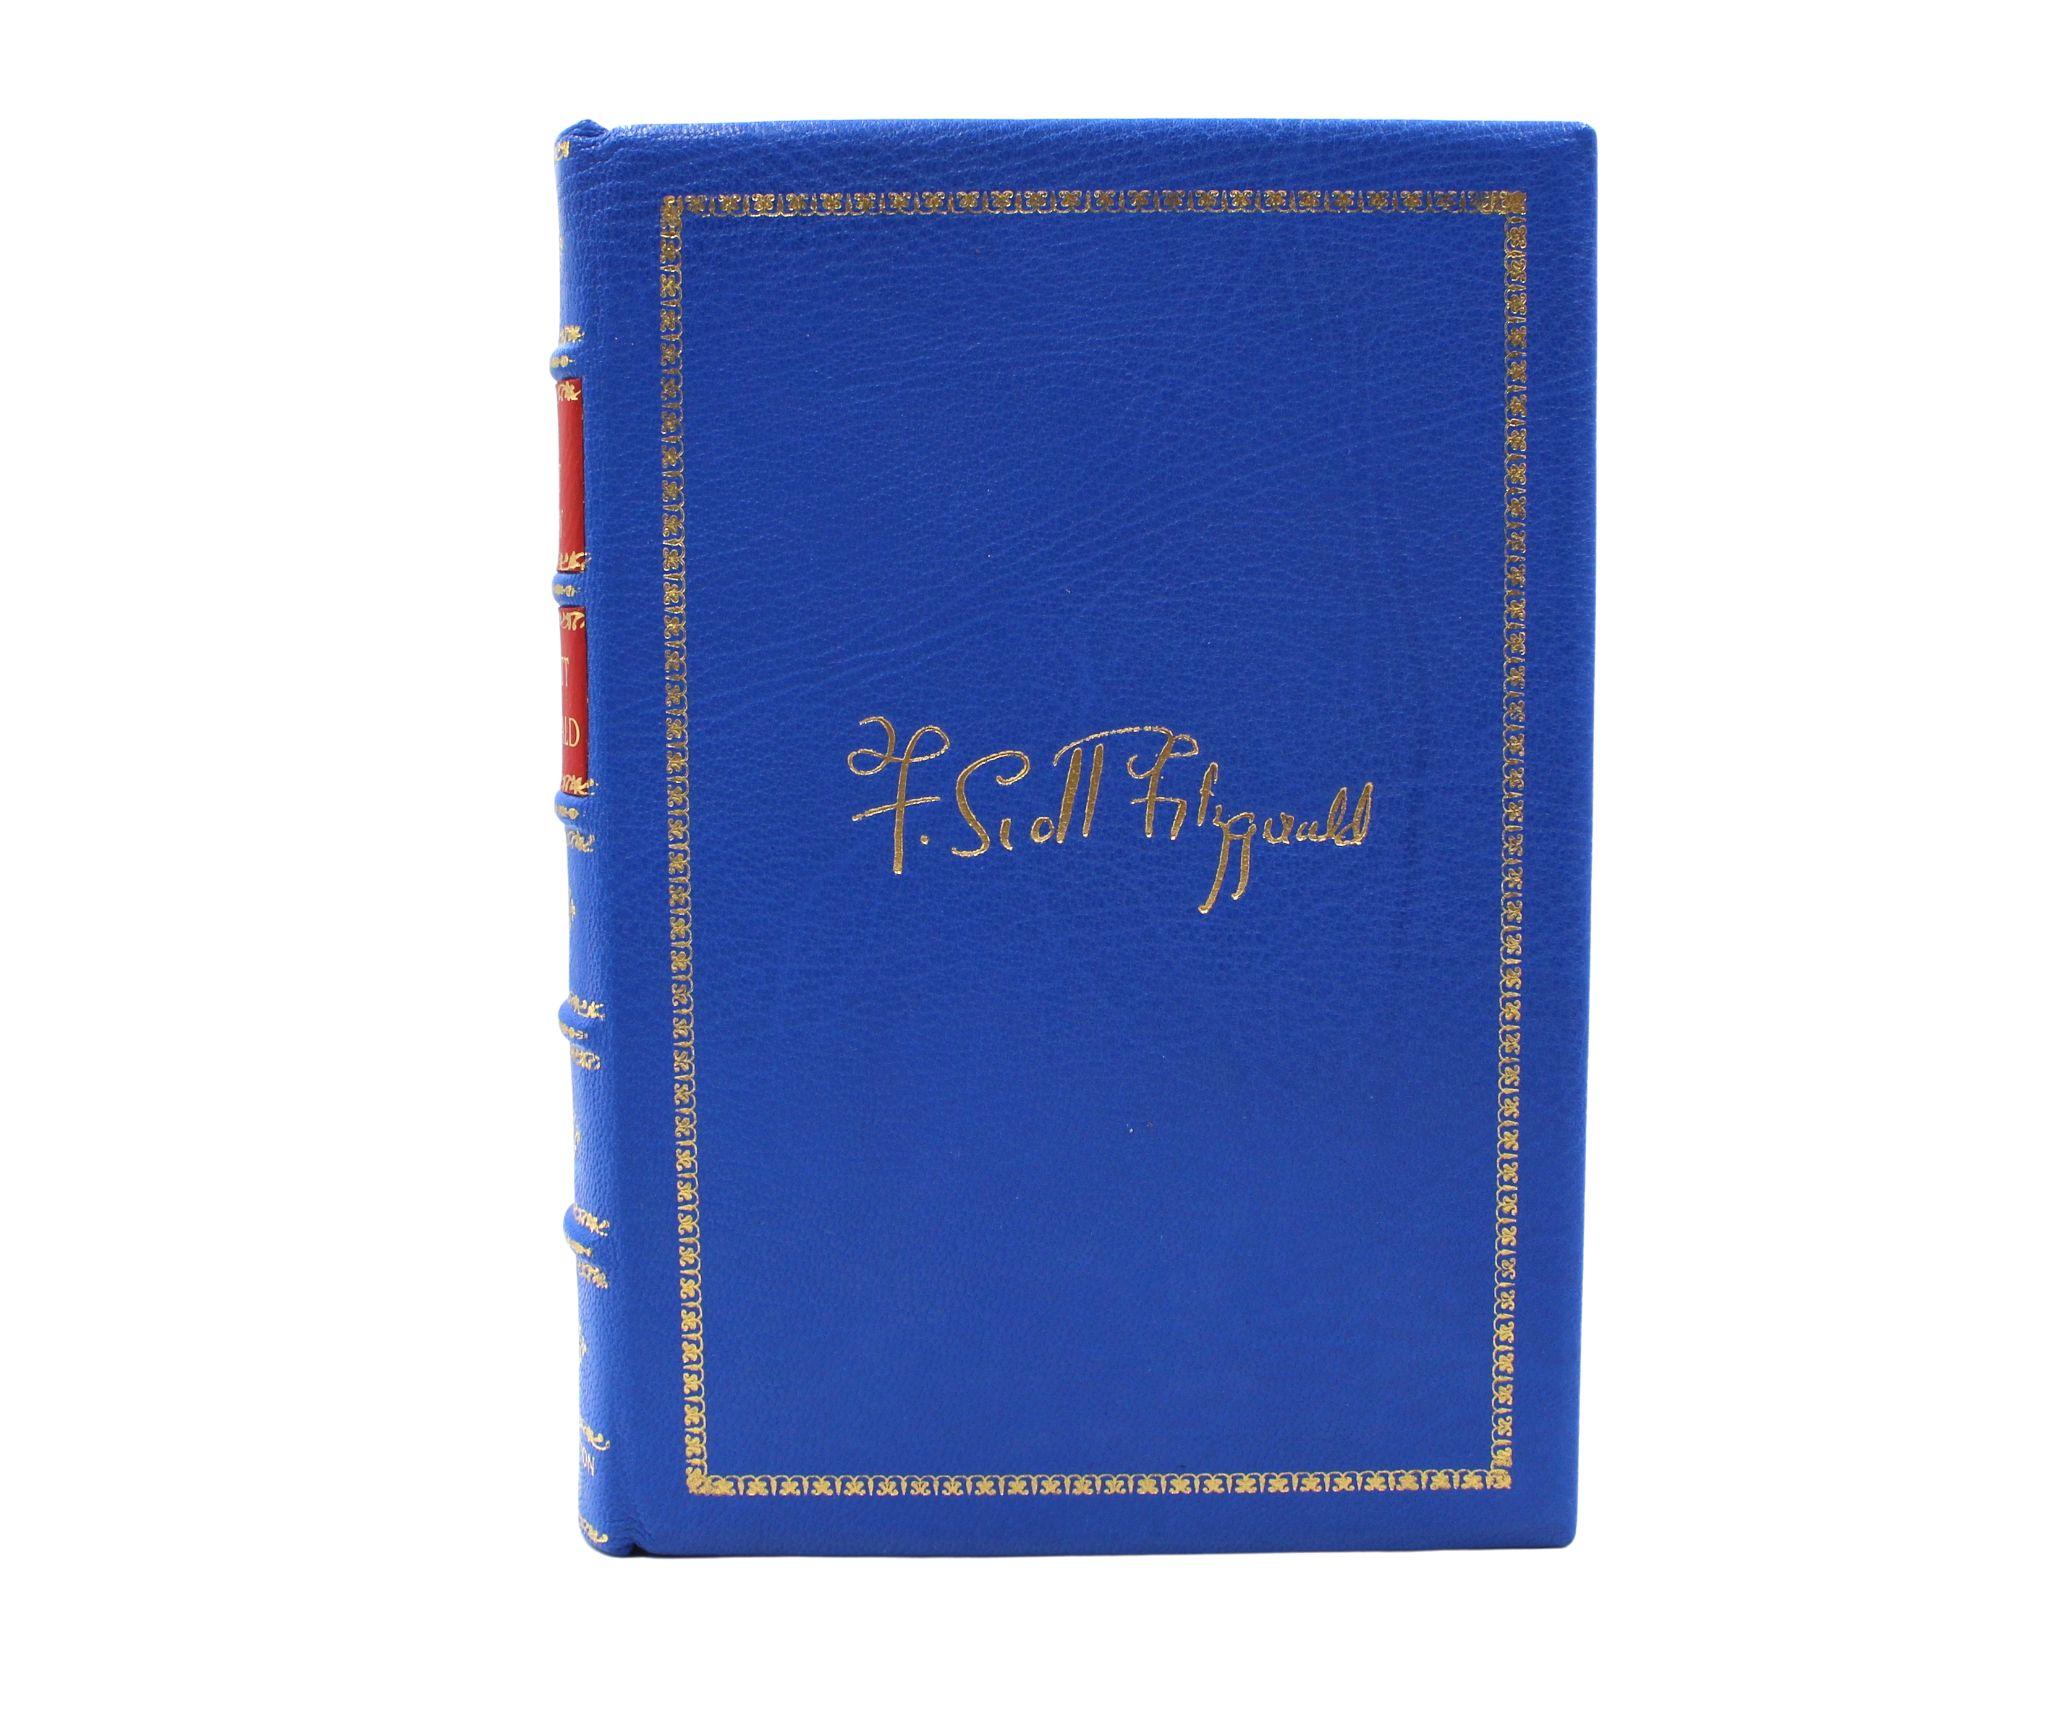 American The Great Gatsby by F. Scott Fitzgerald, First Edition, First Issue, 1925 For Sale